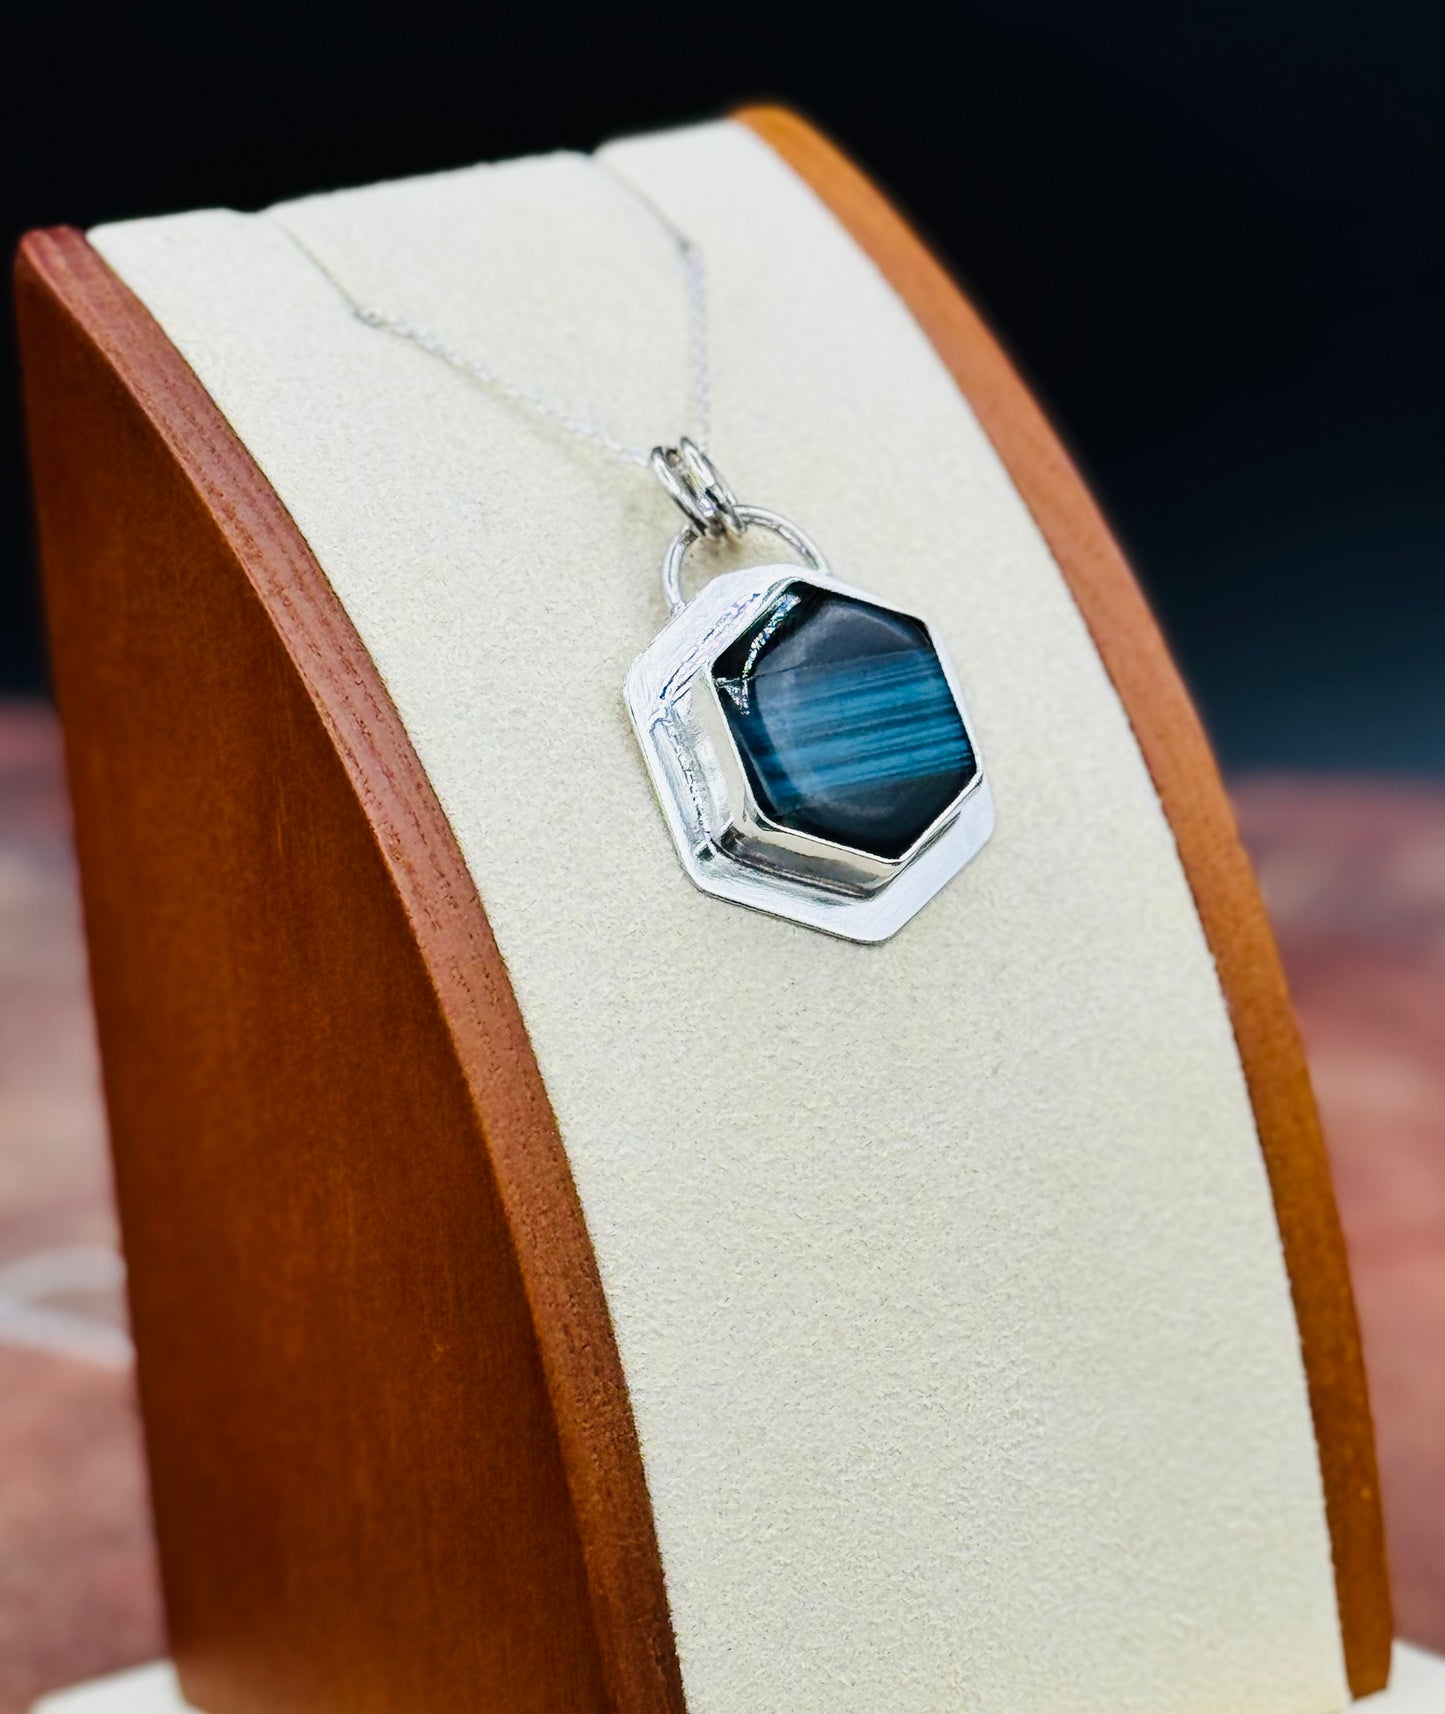 Black Onyx with Labradorite Inlay Sterling Silver Pendant Necklace